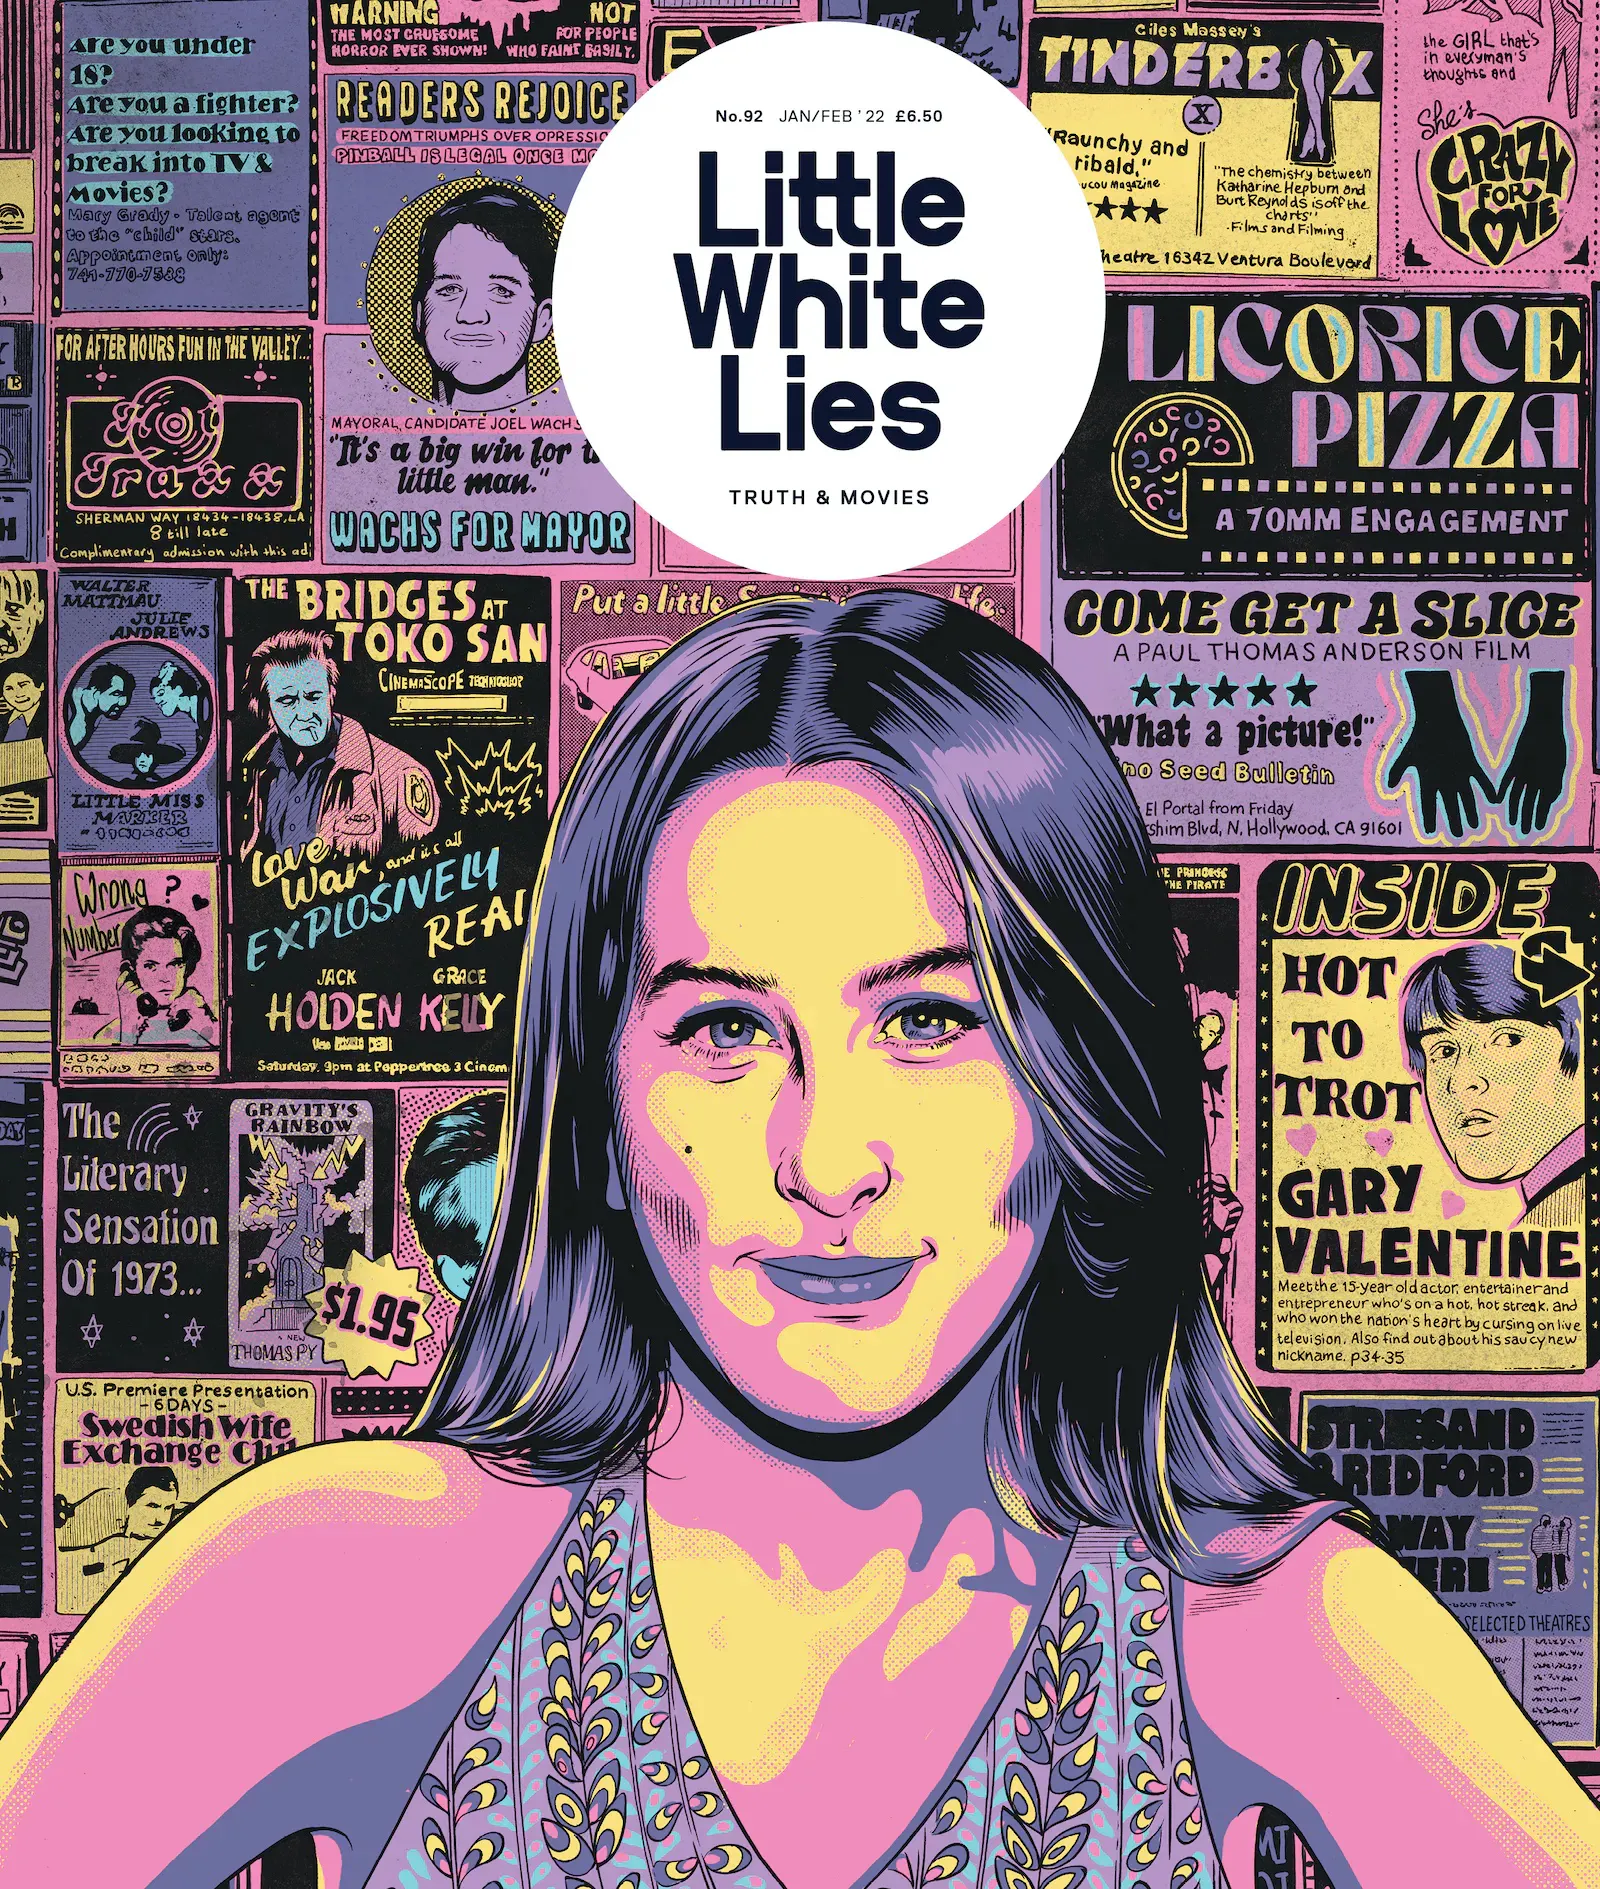 A Little White Lies magazine cover, featuring an illustration of Alana Haim from the film Licorice Pizza.